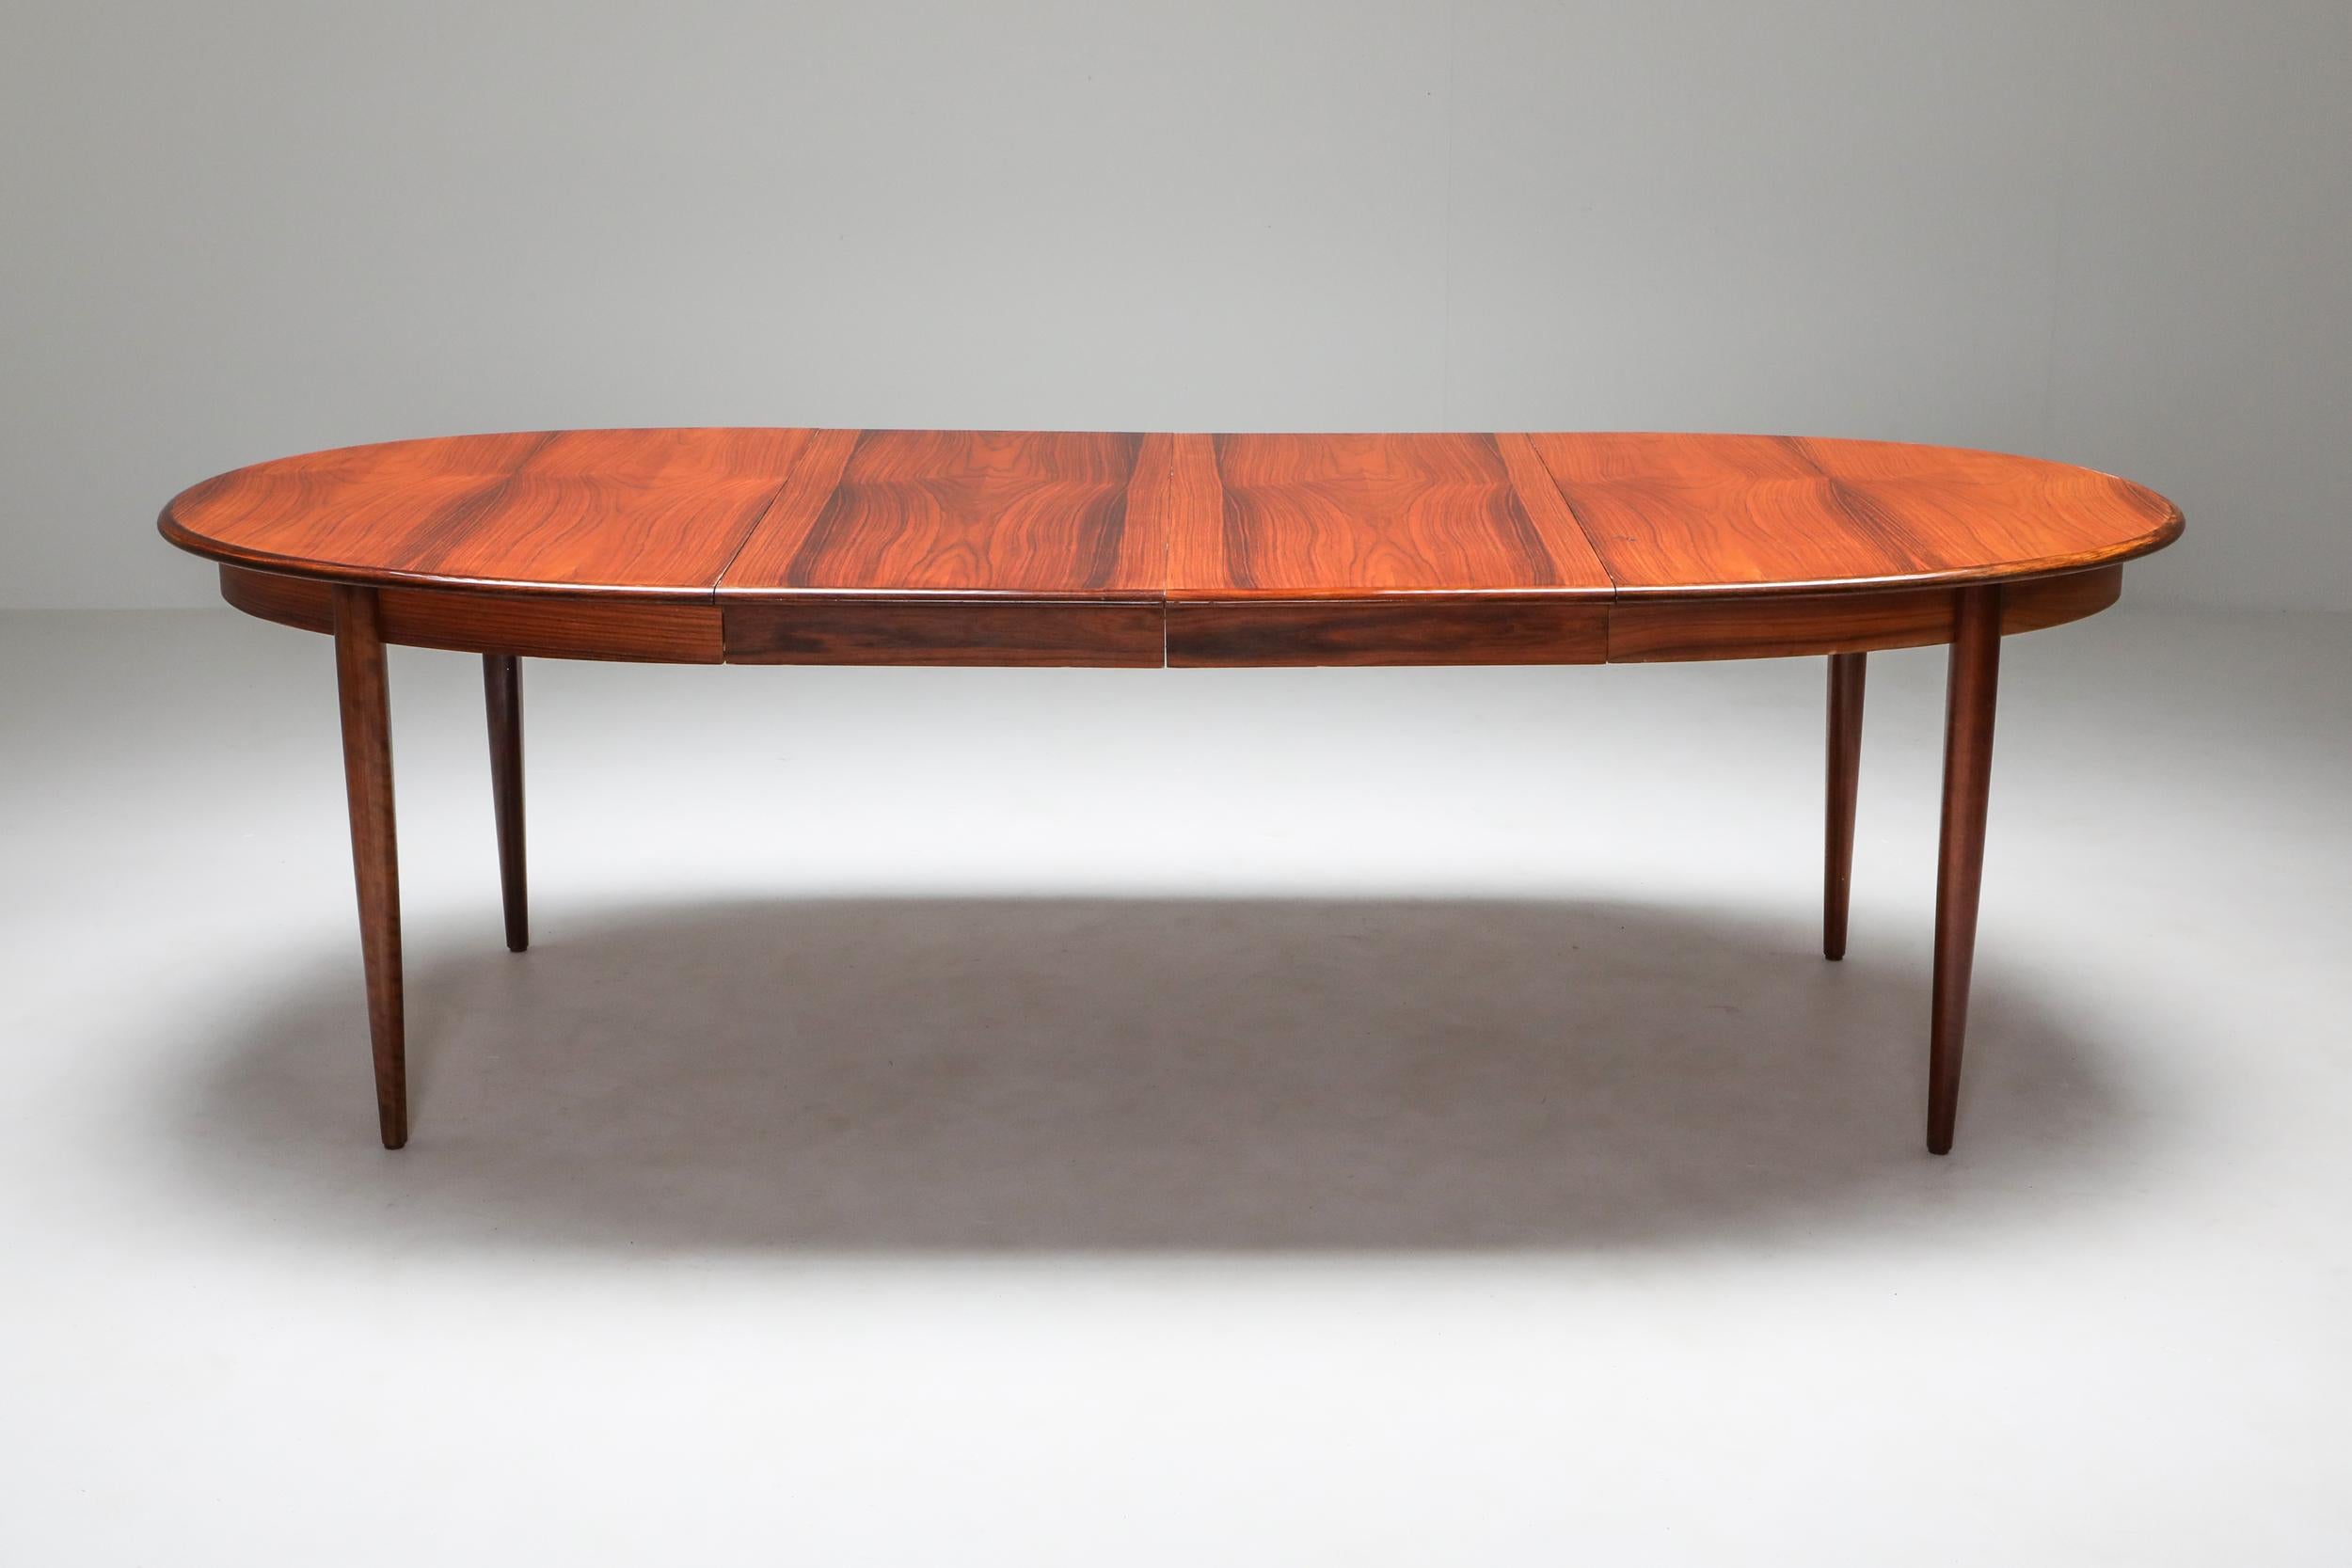 Niels Moller, rosewood, Scandinavian Modern, extendable, dining table

Round dining table with two extension leaves. Fits 8 to 10 people
Niels Møller model 82 dining chairs, 1970 set of 6 rosewood dining chairs designed by Niels O. Møller for